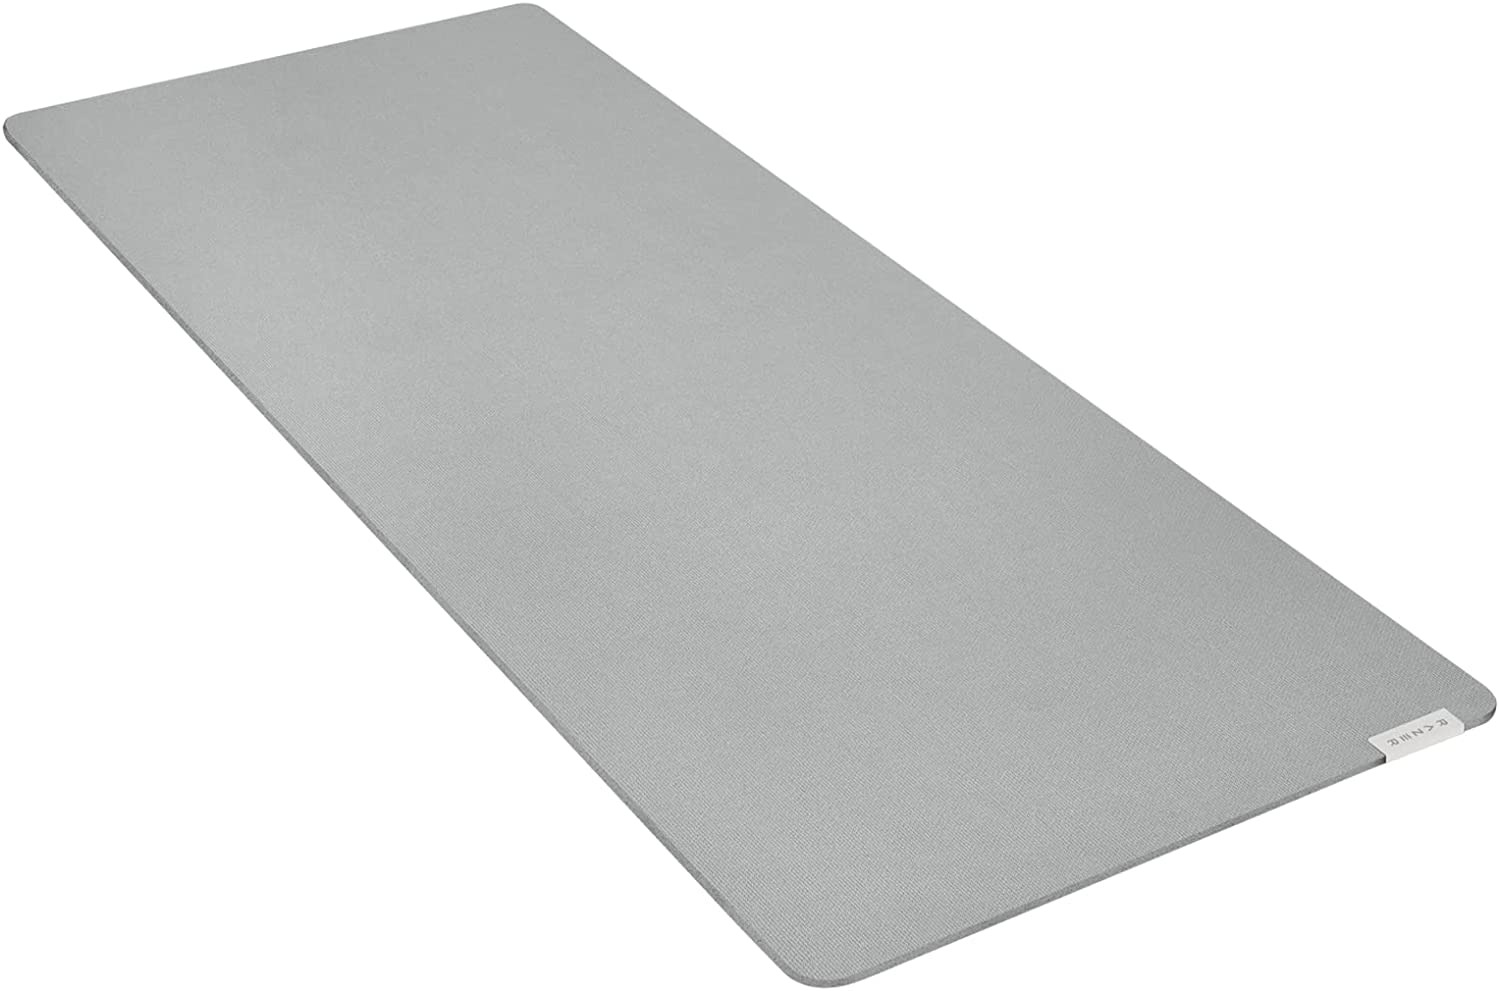 Pro Glide Soft Mouse Mat: Thick, High-Density Rubber Foam - Textured Micro-Weave